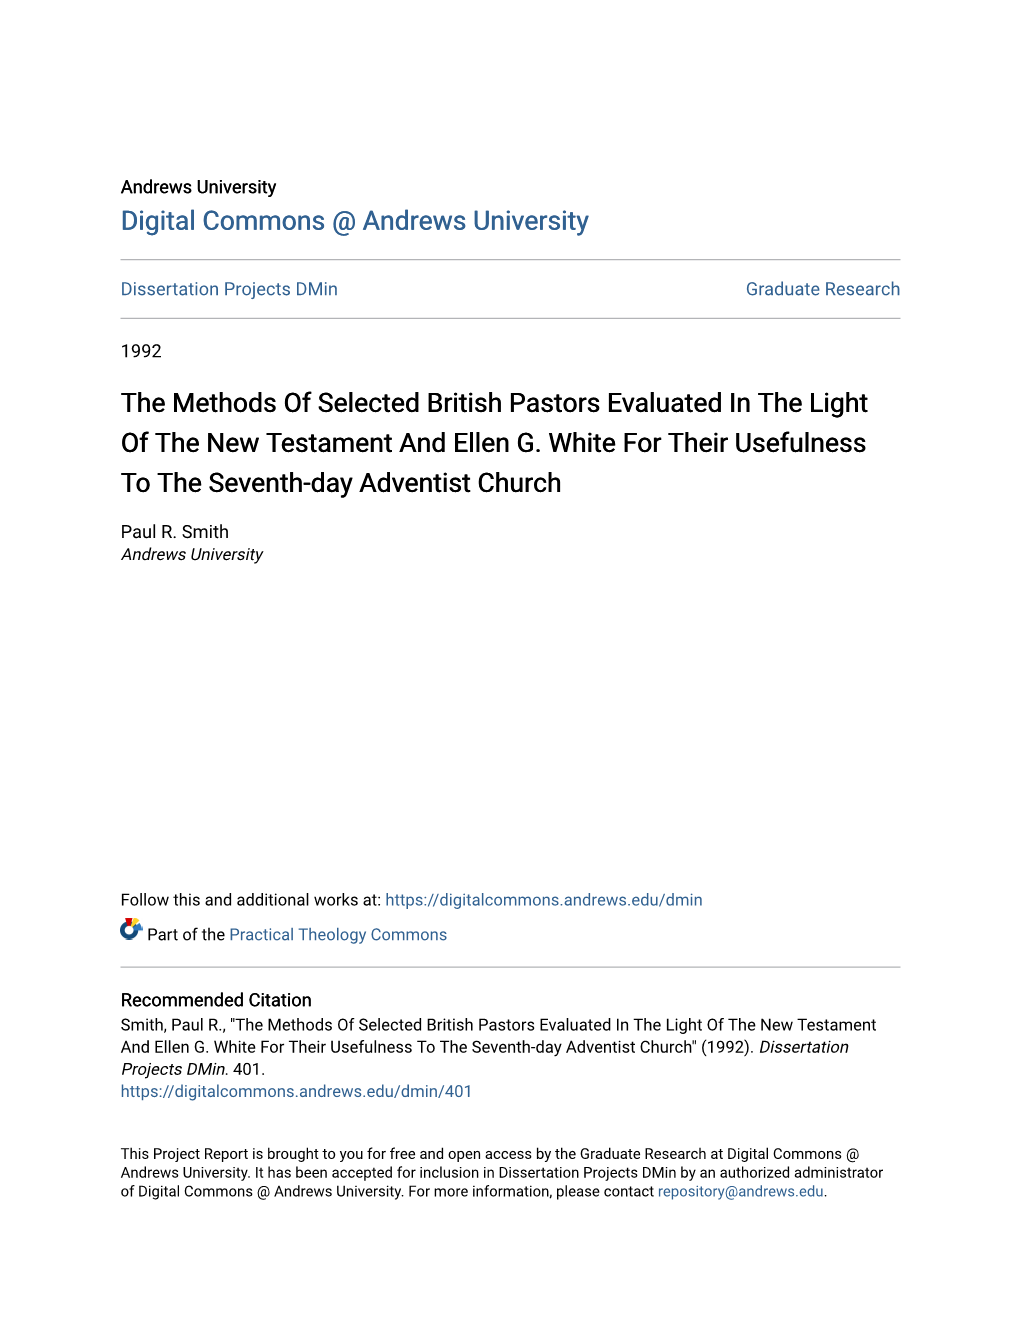 The Methods of Selected British Pastors Evaluated in the Light of the New Testament and Ellen G